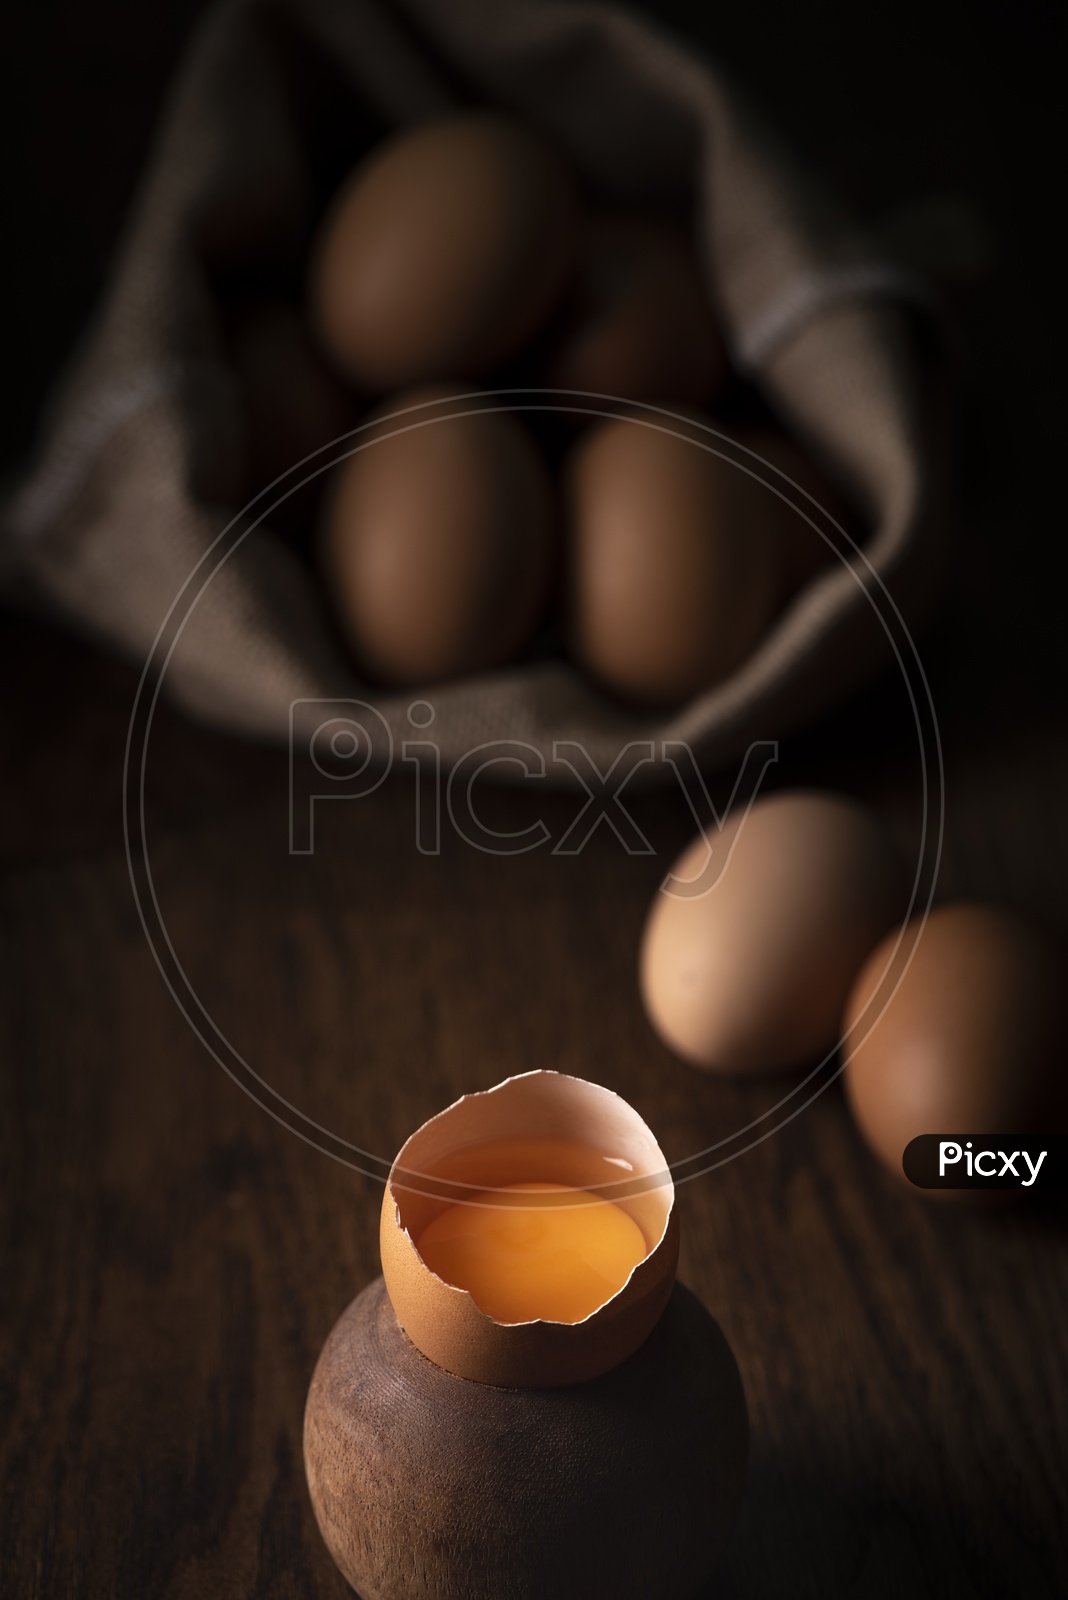 fresh eggs in a basket on wooden table